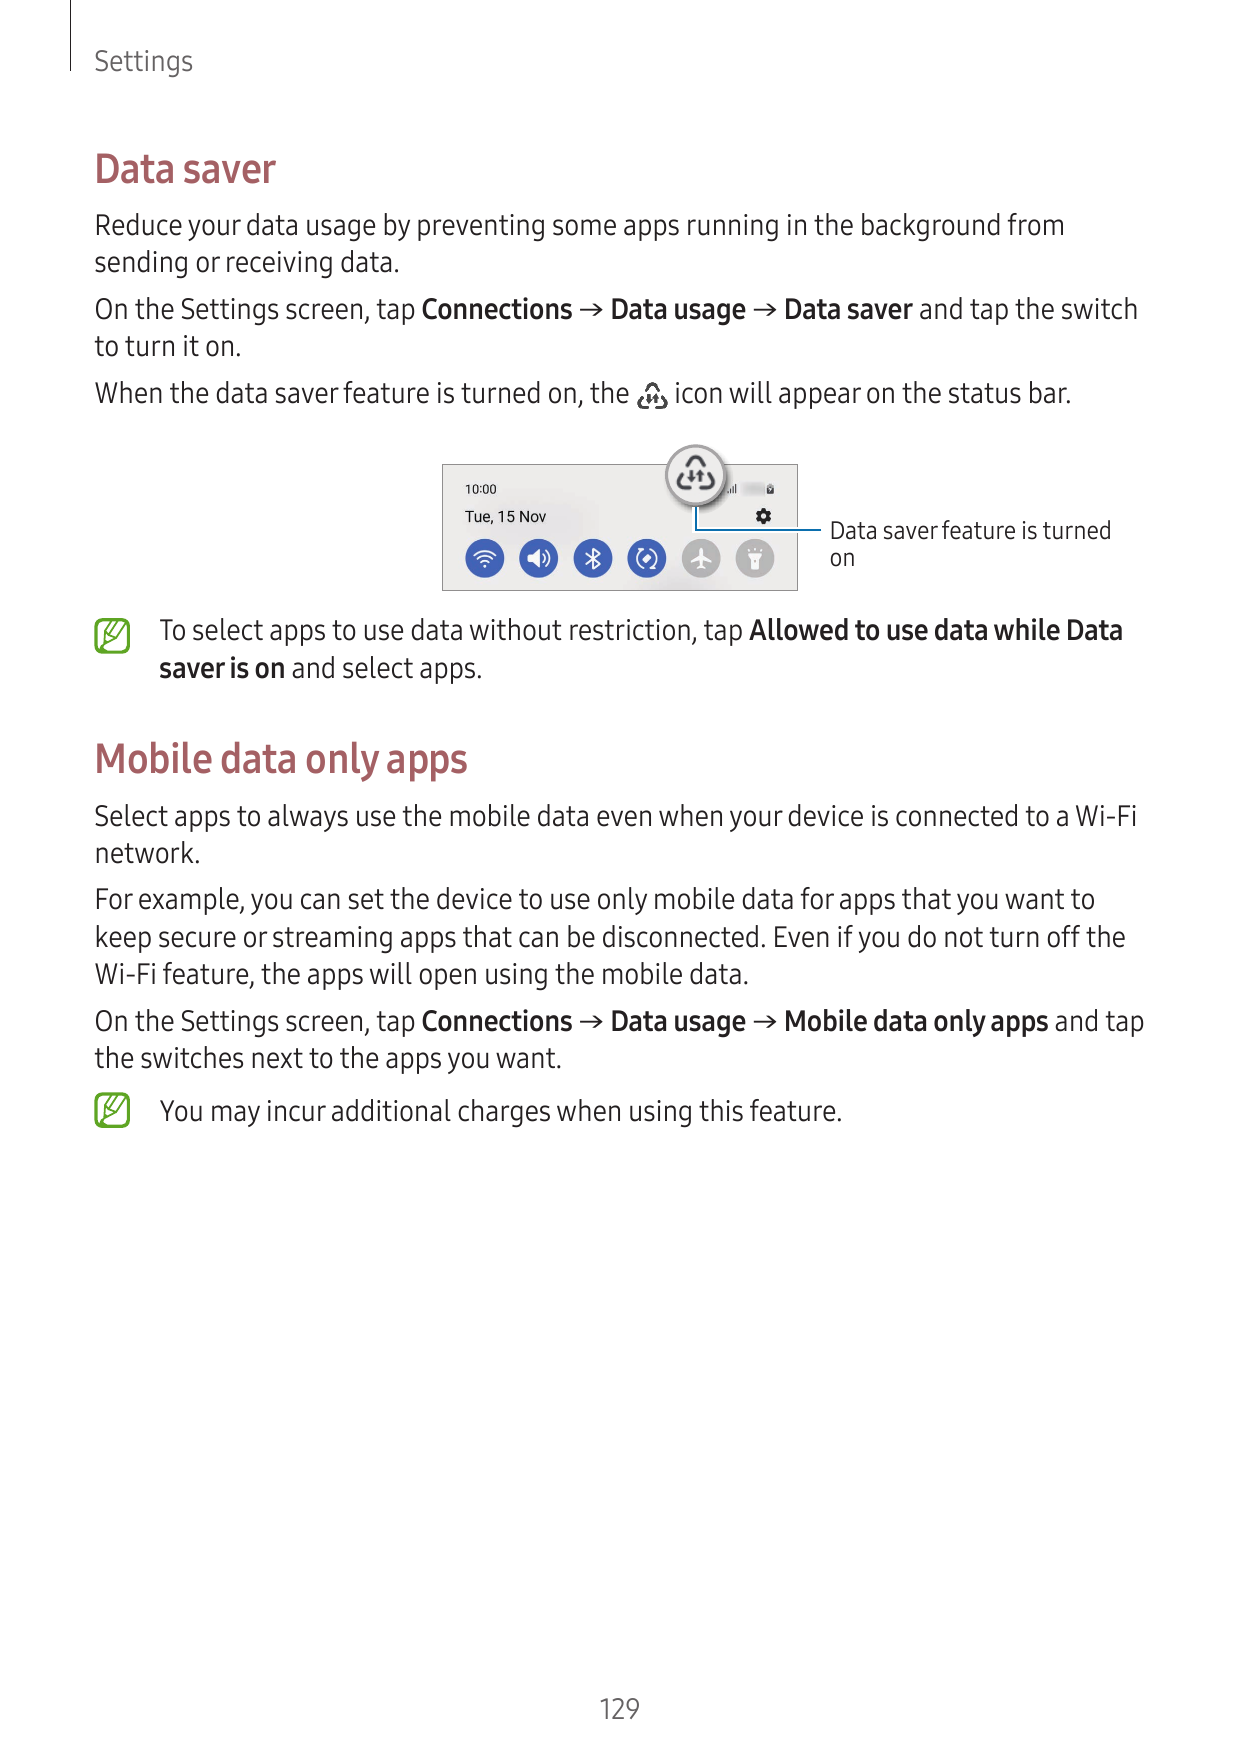 SettingsData saverReduce your data usage by preventing some apps running in the background fromsending or receiving data.On the 